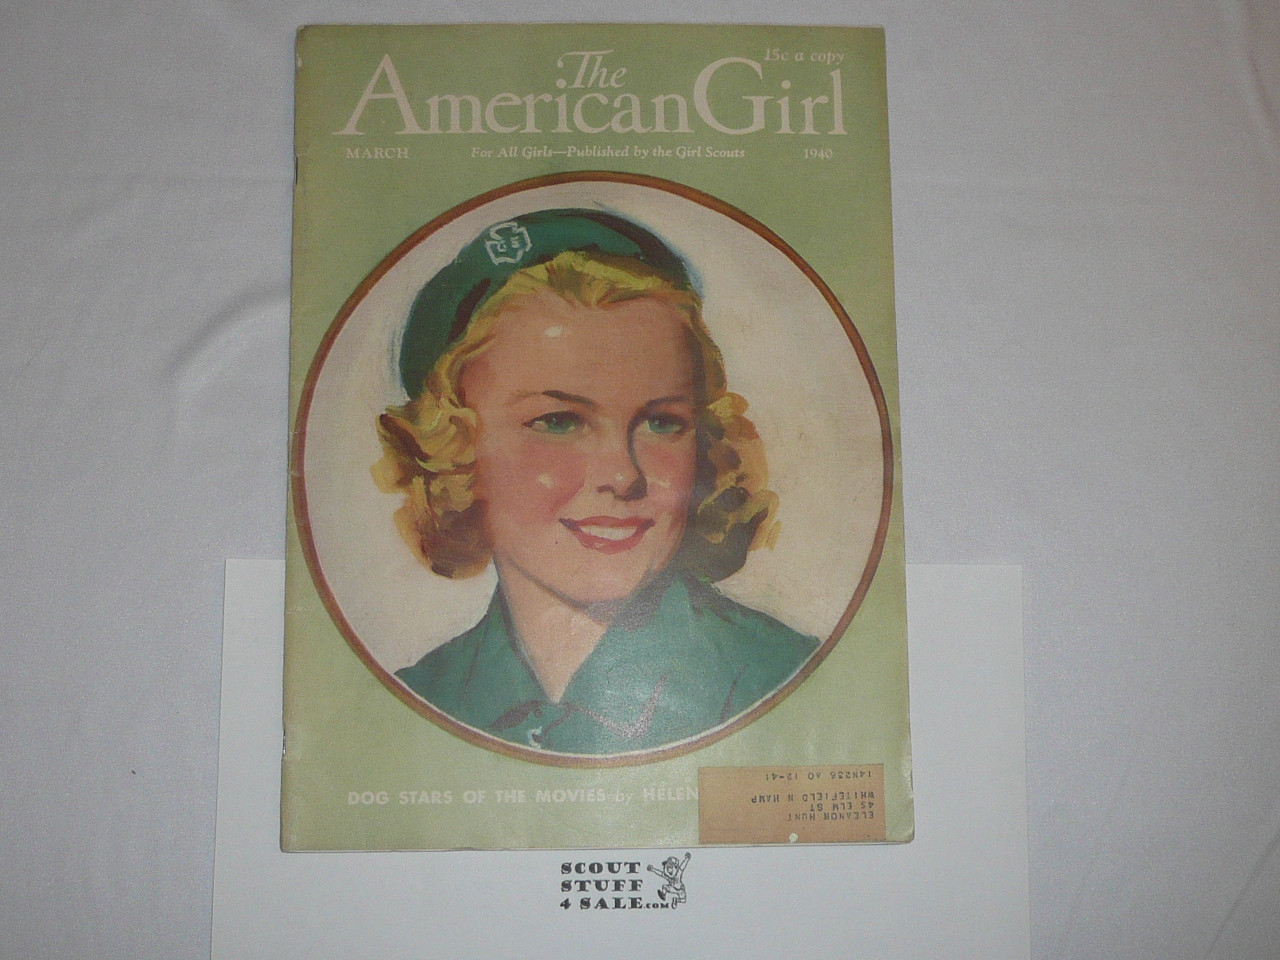 American Girl Magazine, Girl Scout, March 1940